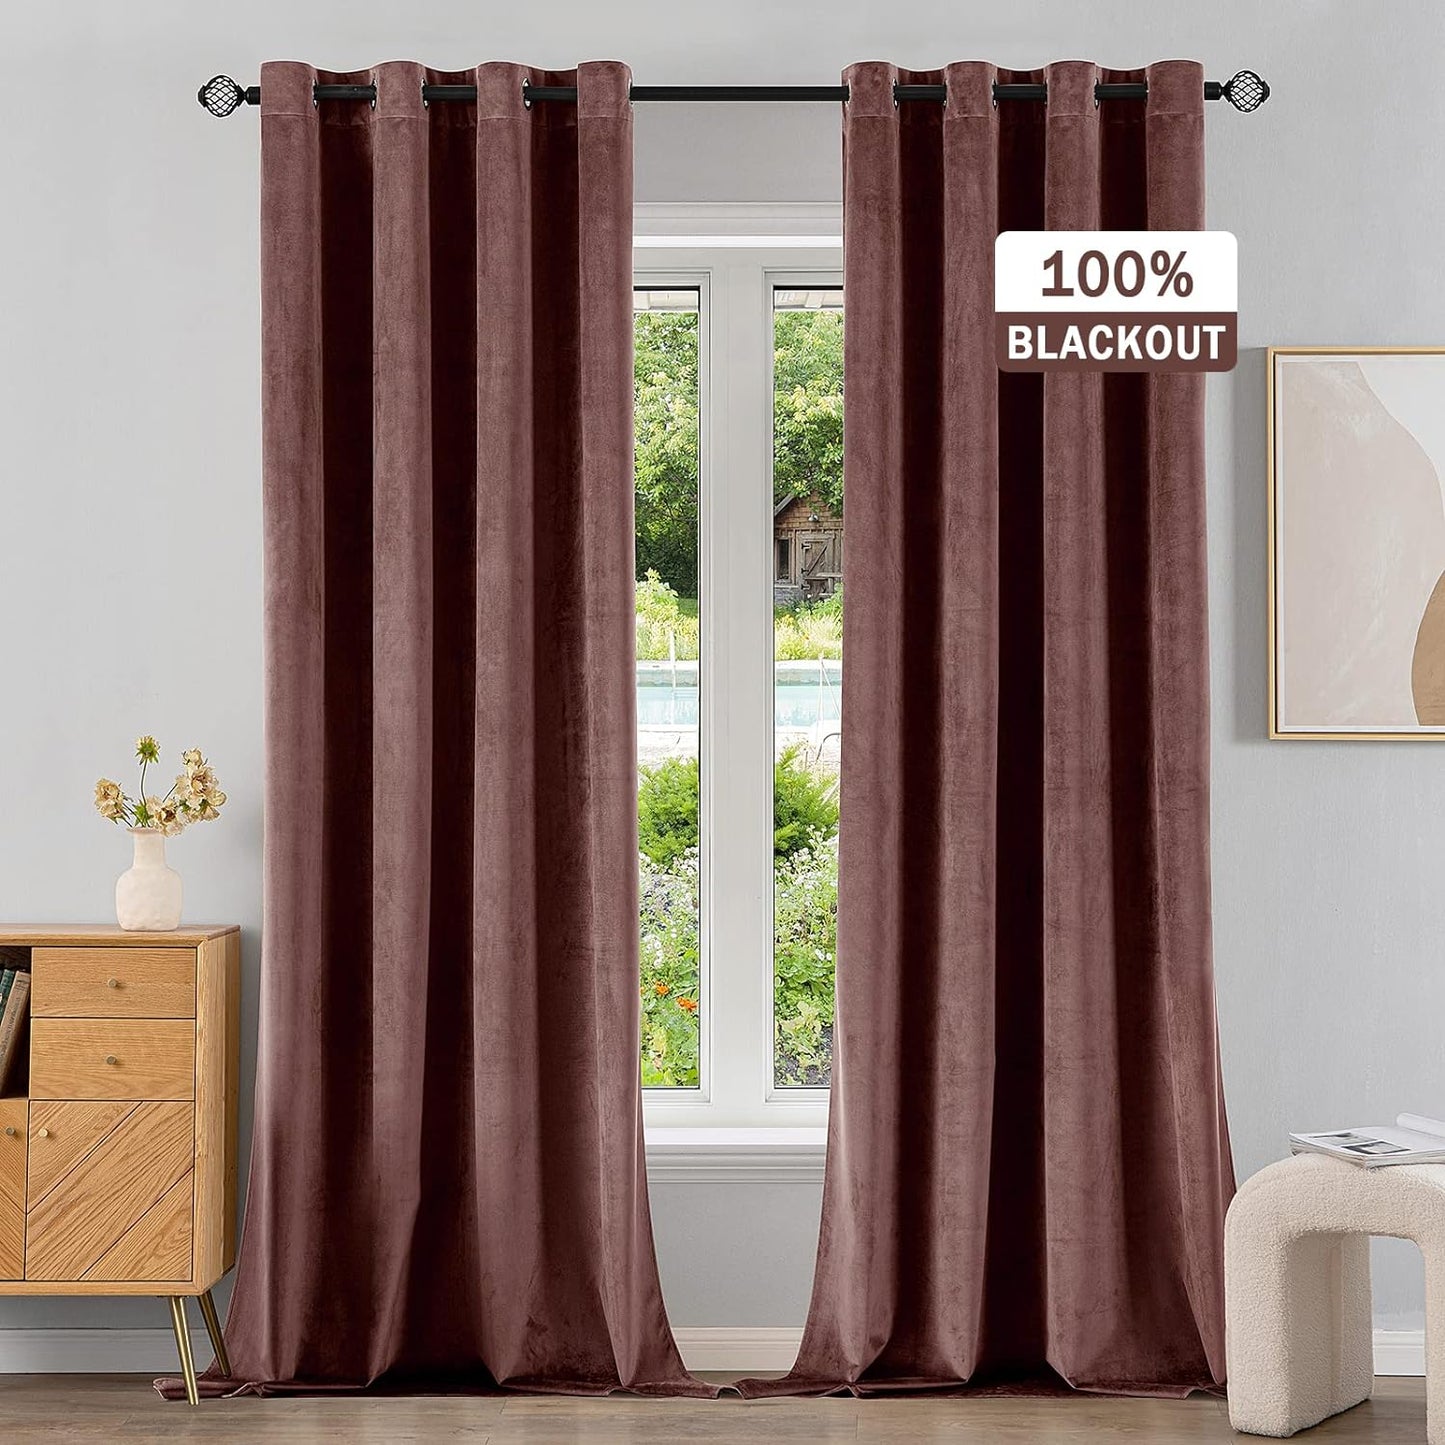 EMEMA Olive Green Velvet Curtains 84 Inch Length 2 Panels Set, Room Darkening Luxury Curtains, Grommet Thermal Insulated Drapes, Window Curtains for Living Room, W52 X L84, Olive Green  EMEMA 100 Blackout/ Dry Rose W52" X L96" 